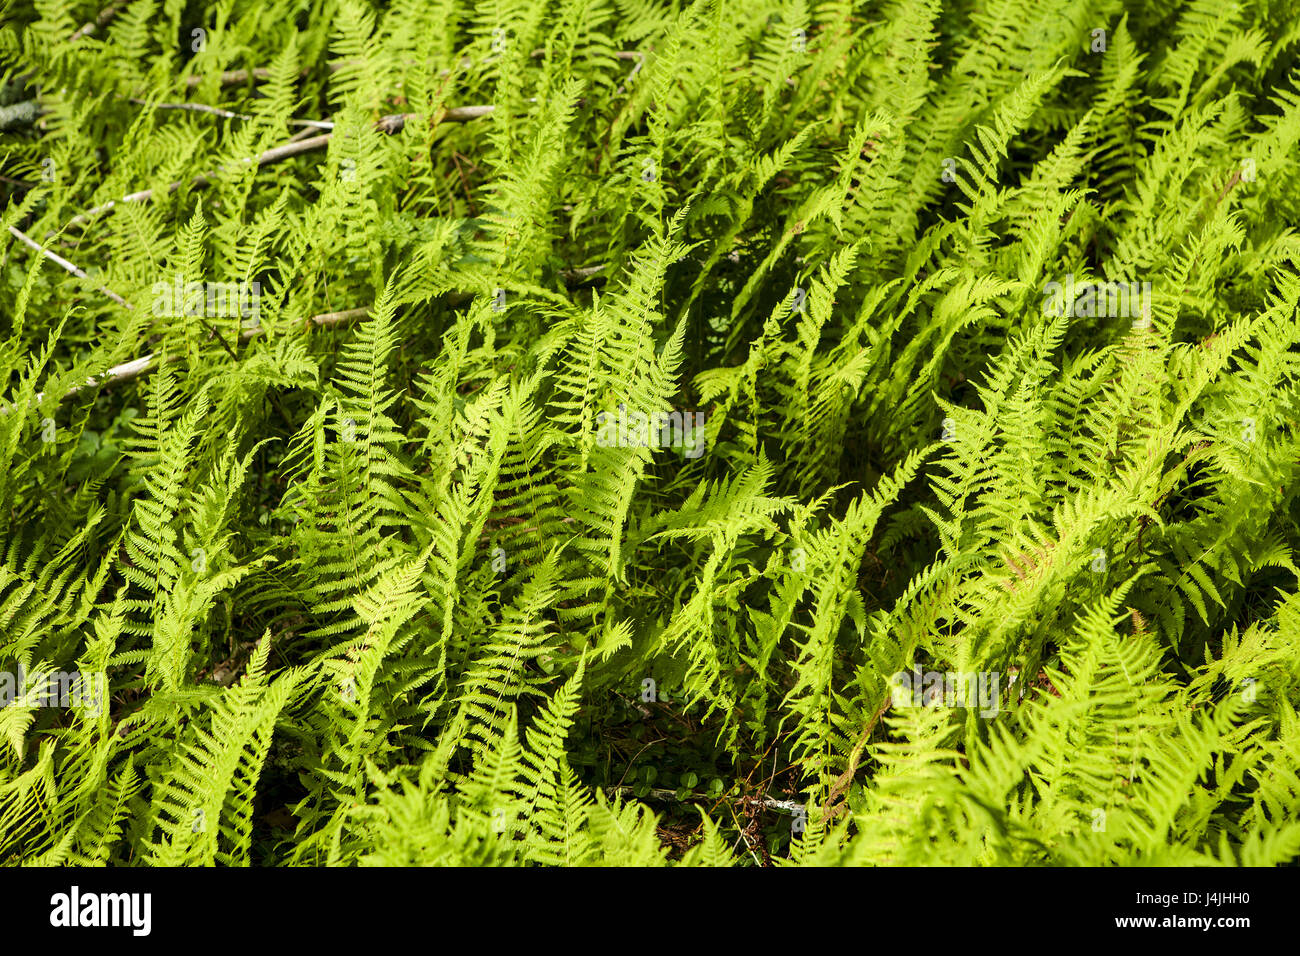 A woodland stand of Hay-scented fern, Dennstaedtia punctilobula, grows in a patch of sunlight. Stock Photo